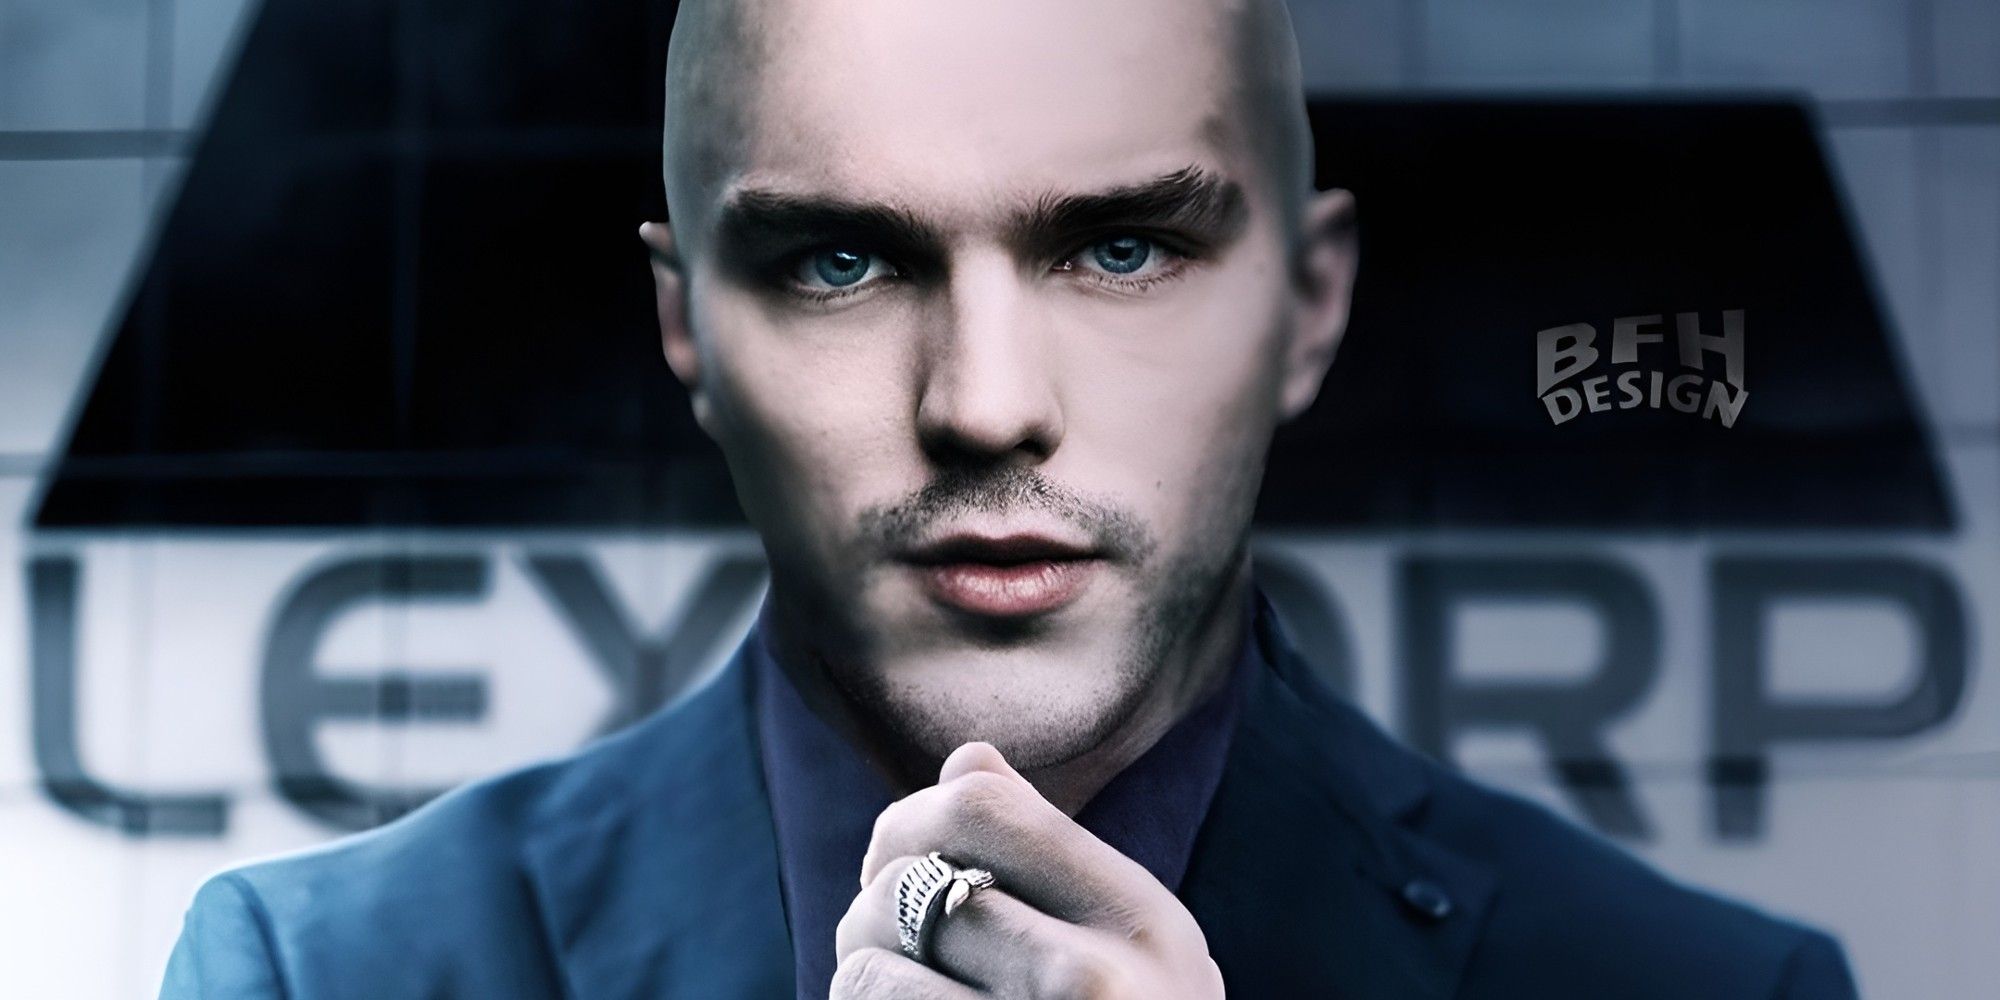 Fan art of Nicholas Hoult with a shaved head as Lex Luthor in Superman: Legacy.